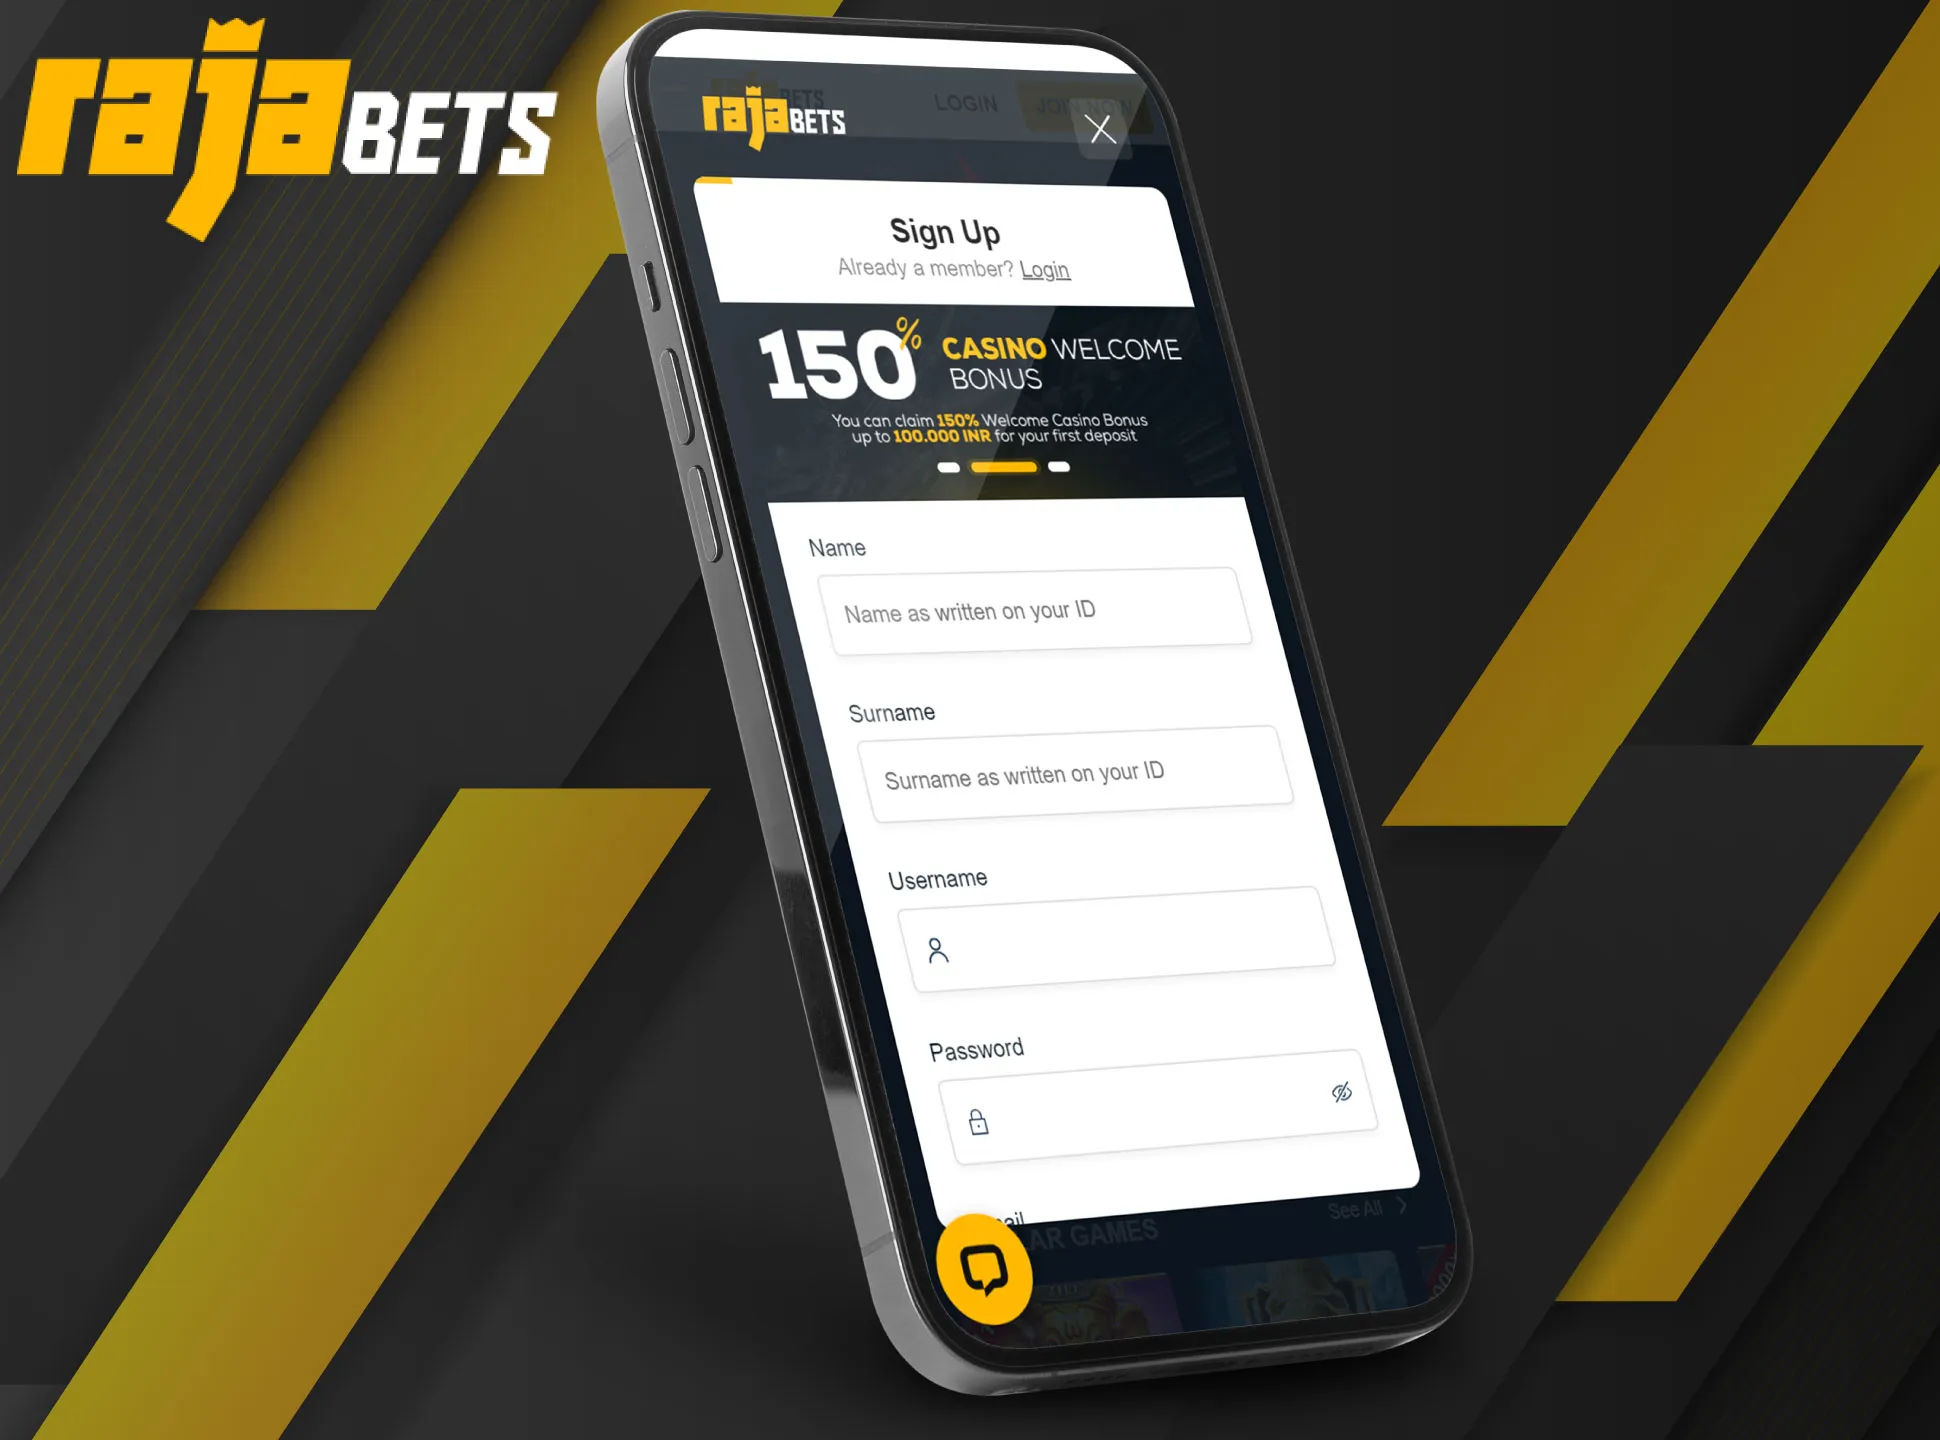 Download and install the Rajabets mobile app to bet via your Android or iOS smartphone.